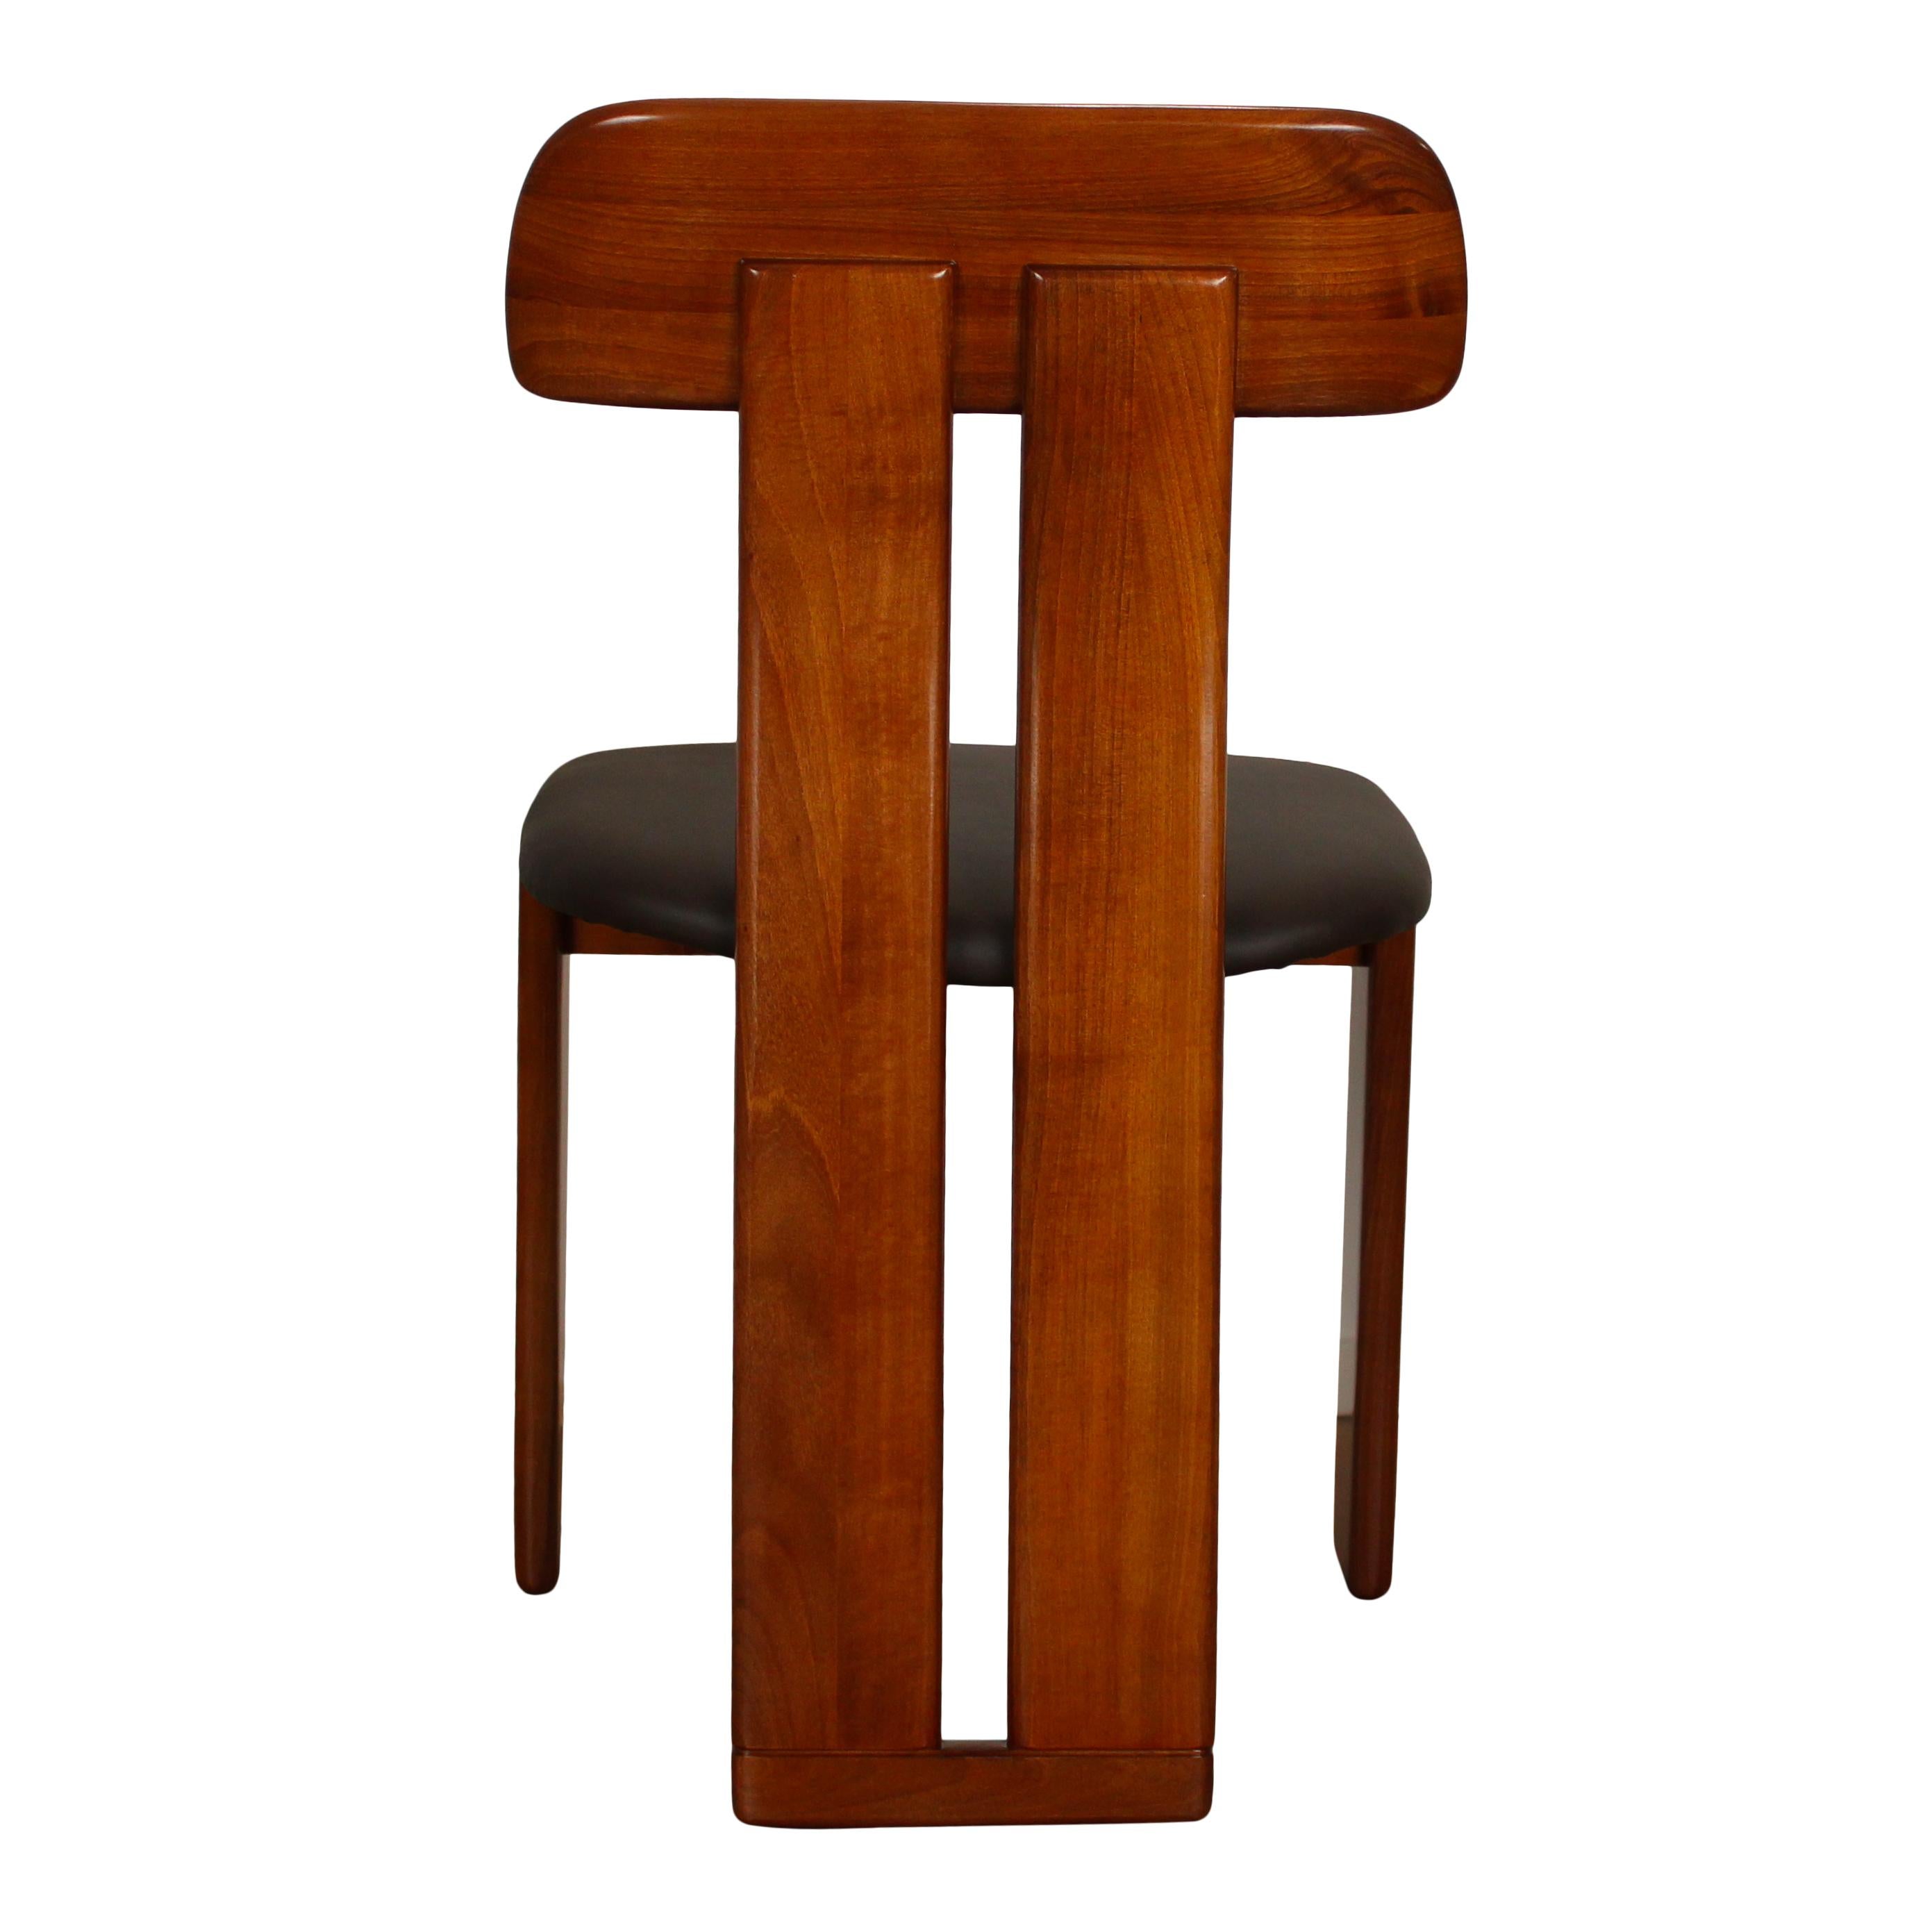 Mario Marenco Walnut Sapporo Dining Chairs for Mobilgirgi, 1970s, Set of 8 For Sale 9